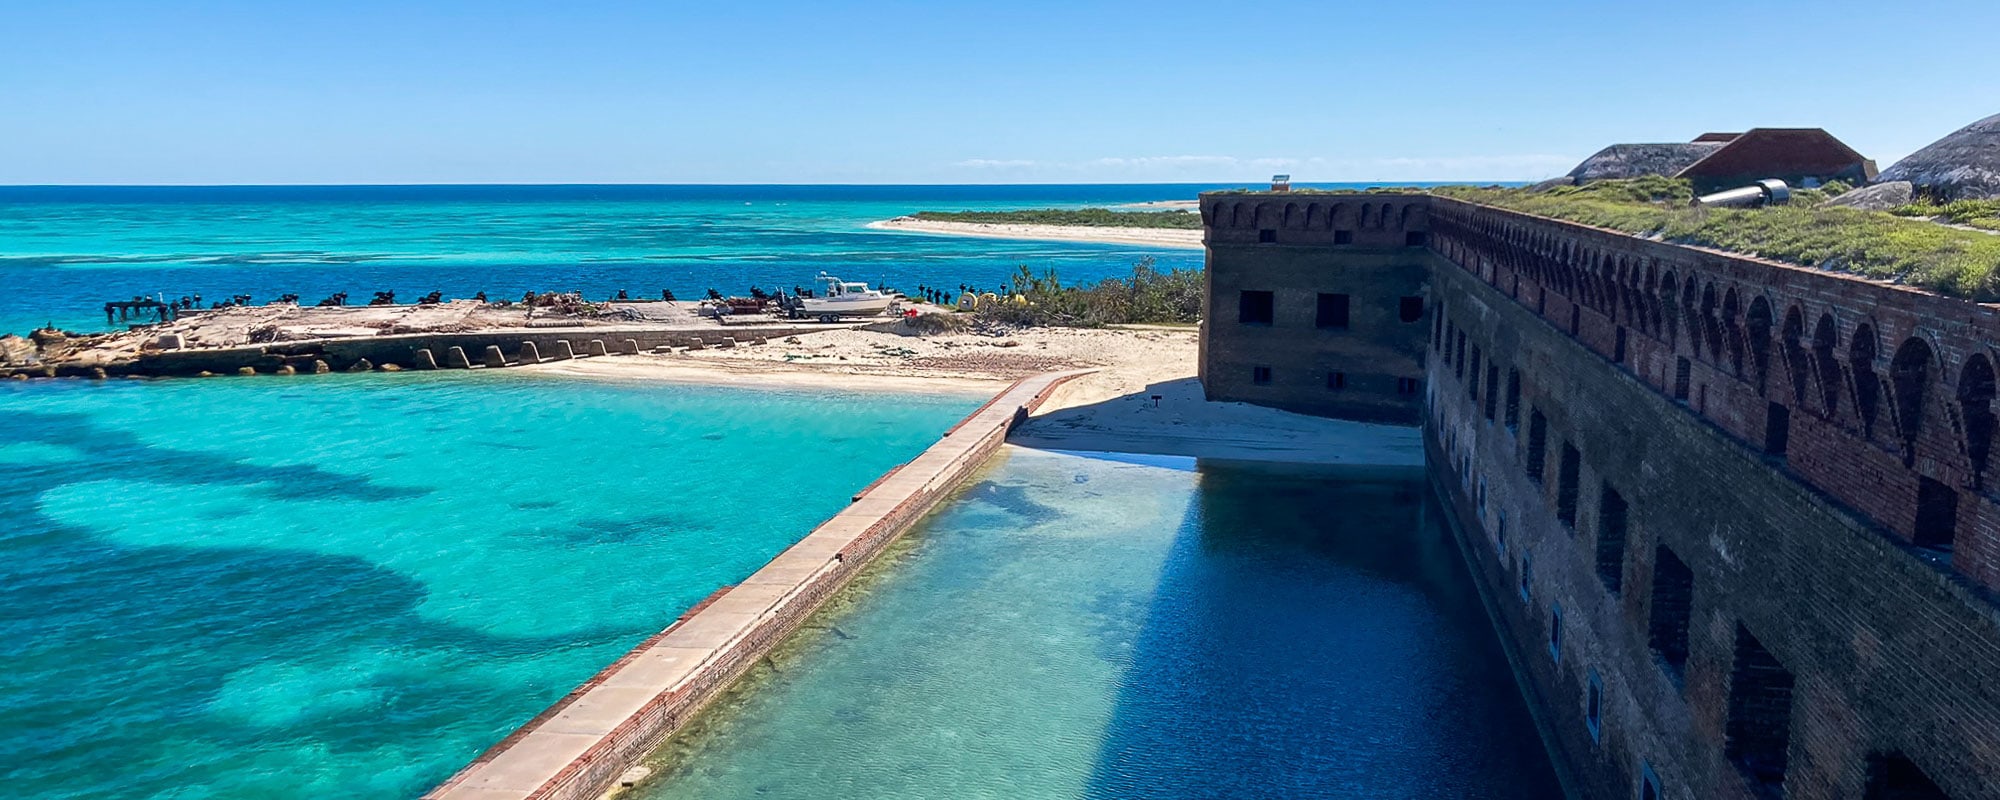 View from top of Fort Jefferson in Dry Tortugas National Park, Florida